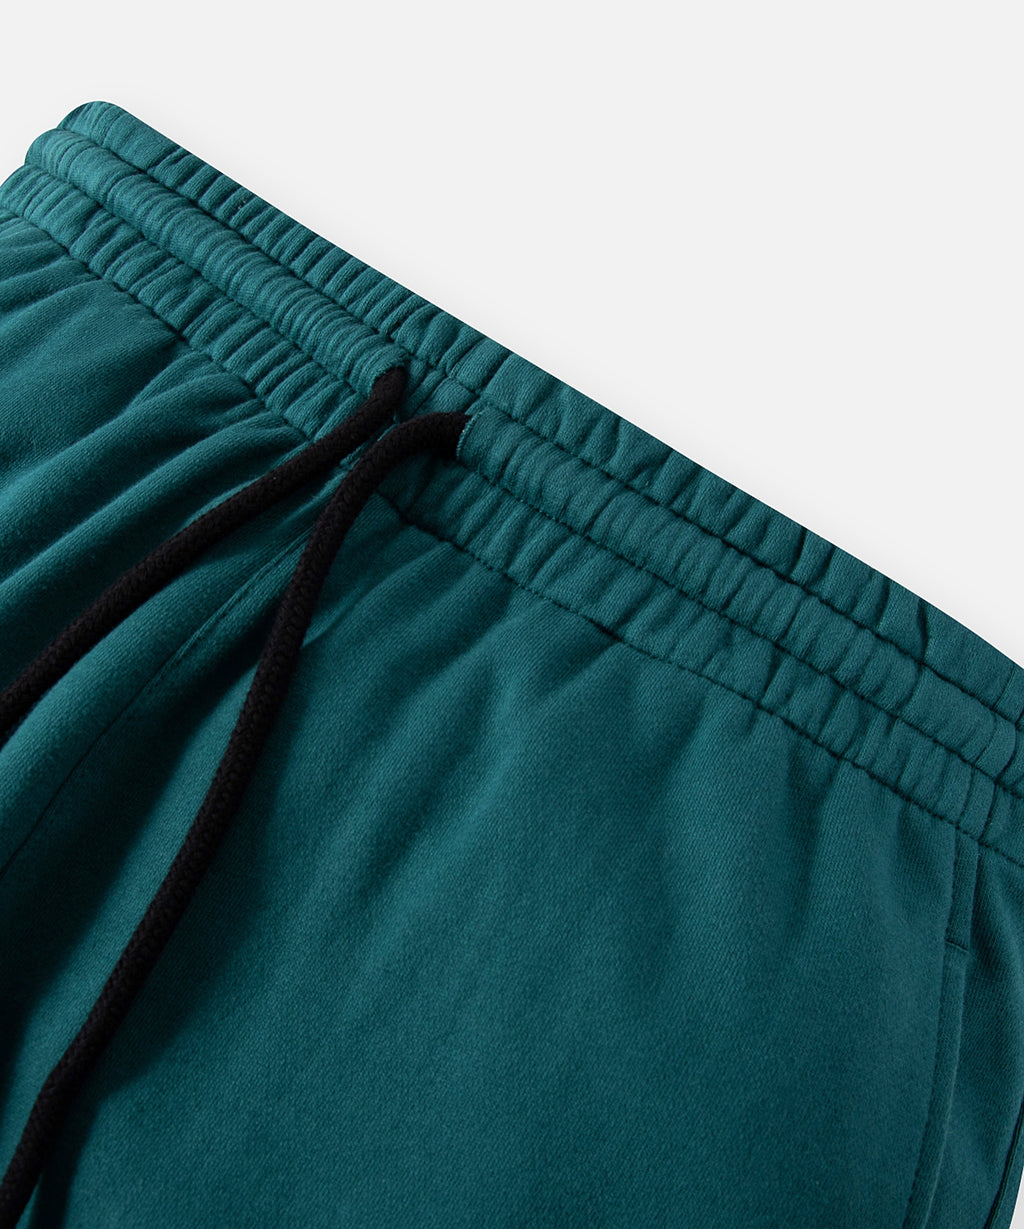  Elasticated waistband and drawcord on Paper Planes Crest Sweatpant, color Atlantic Deep.